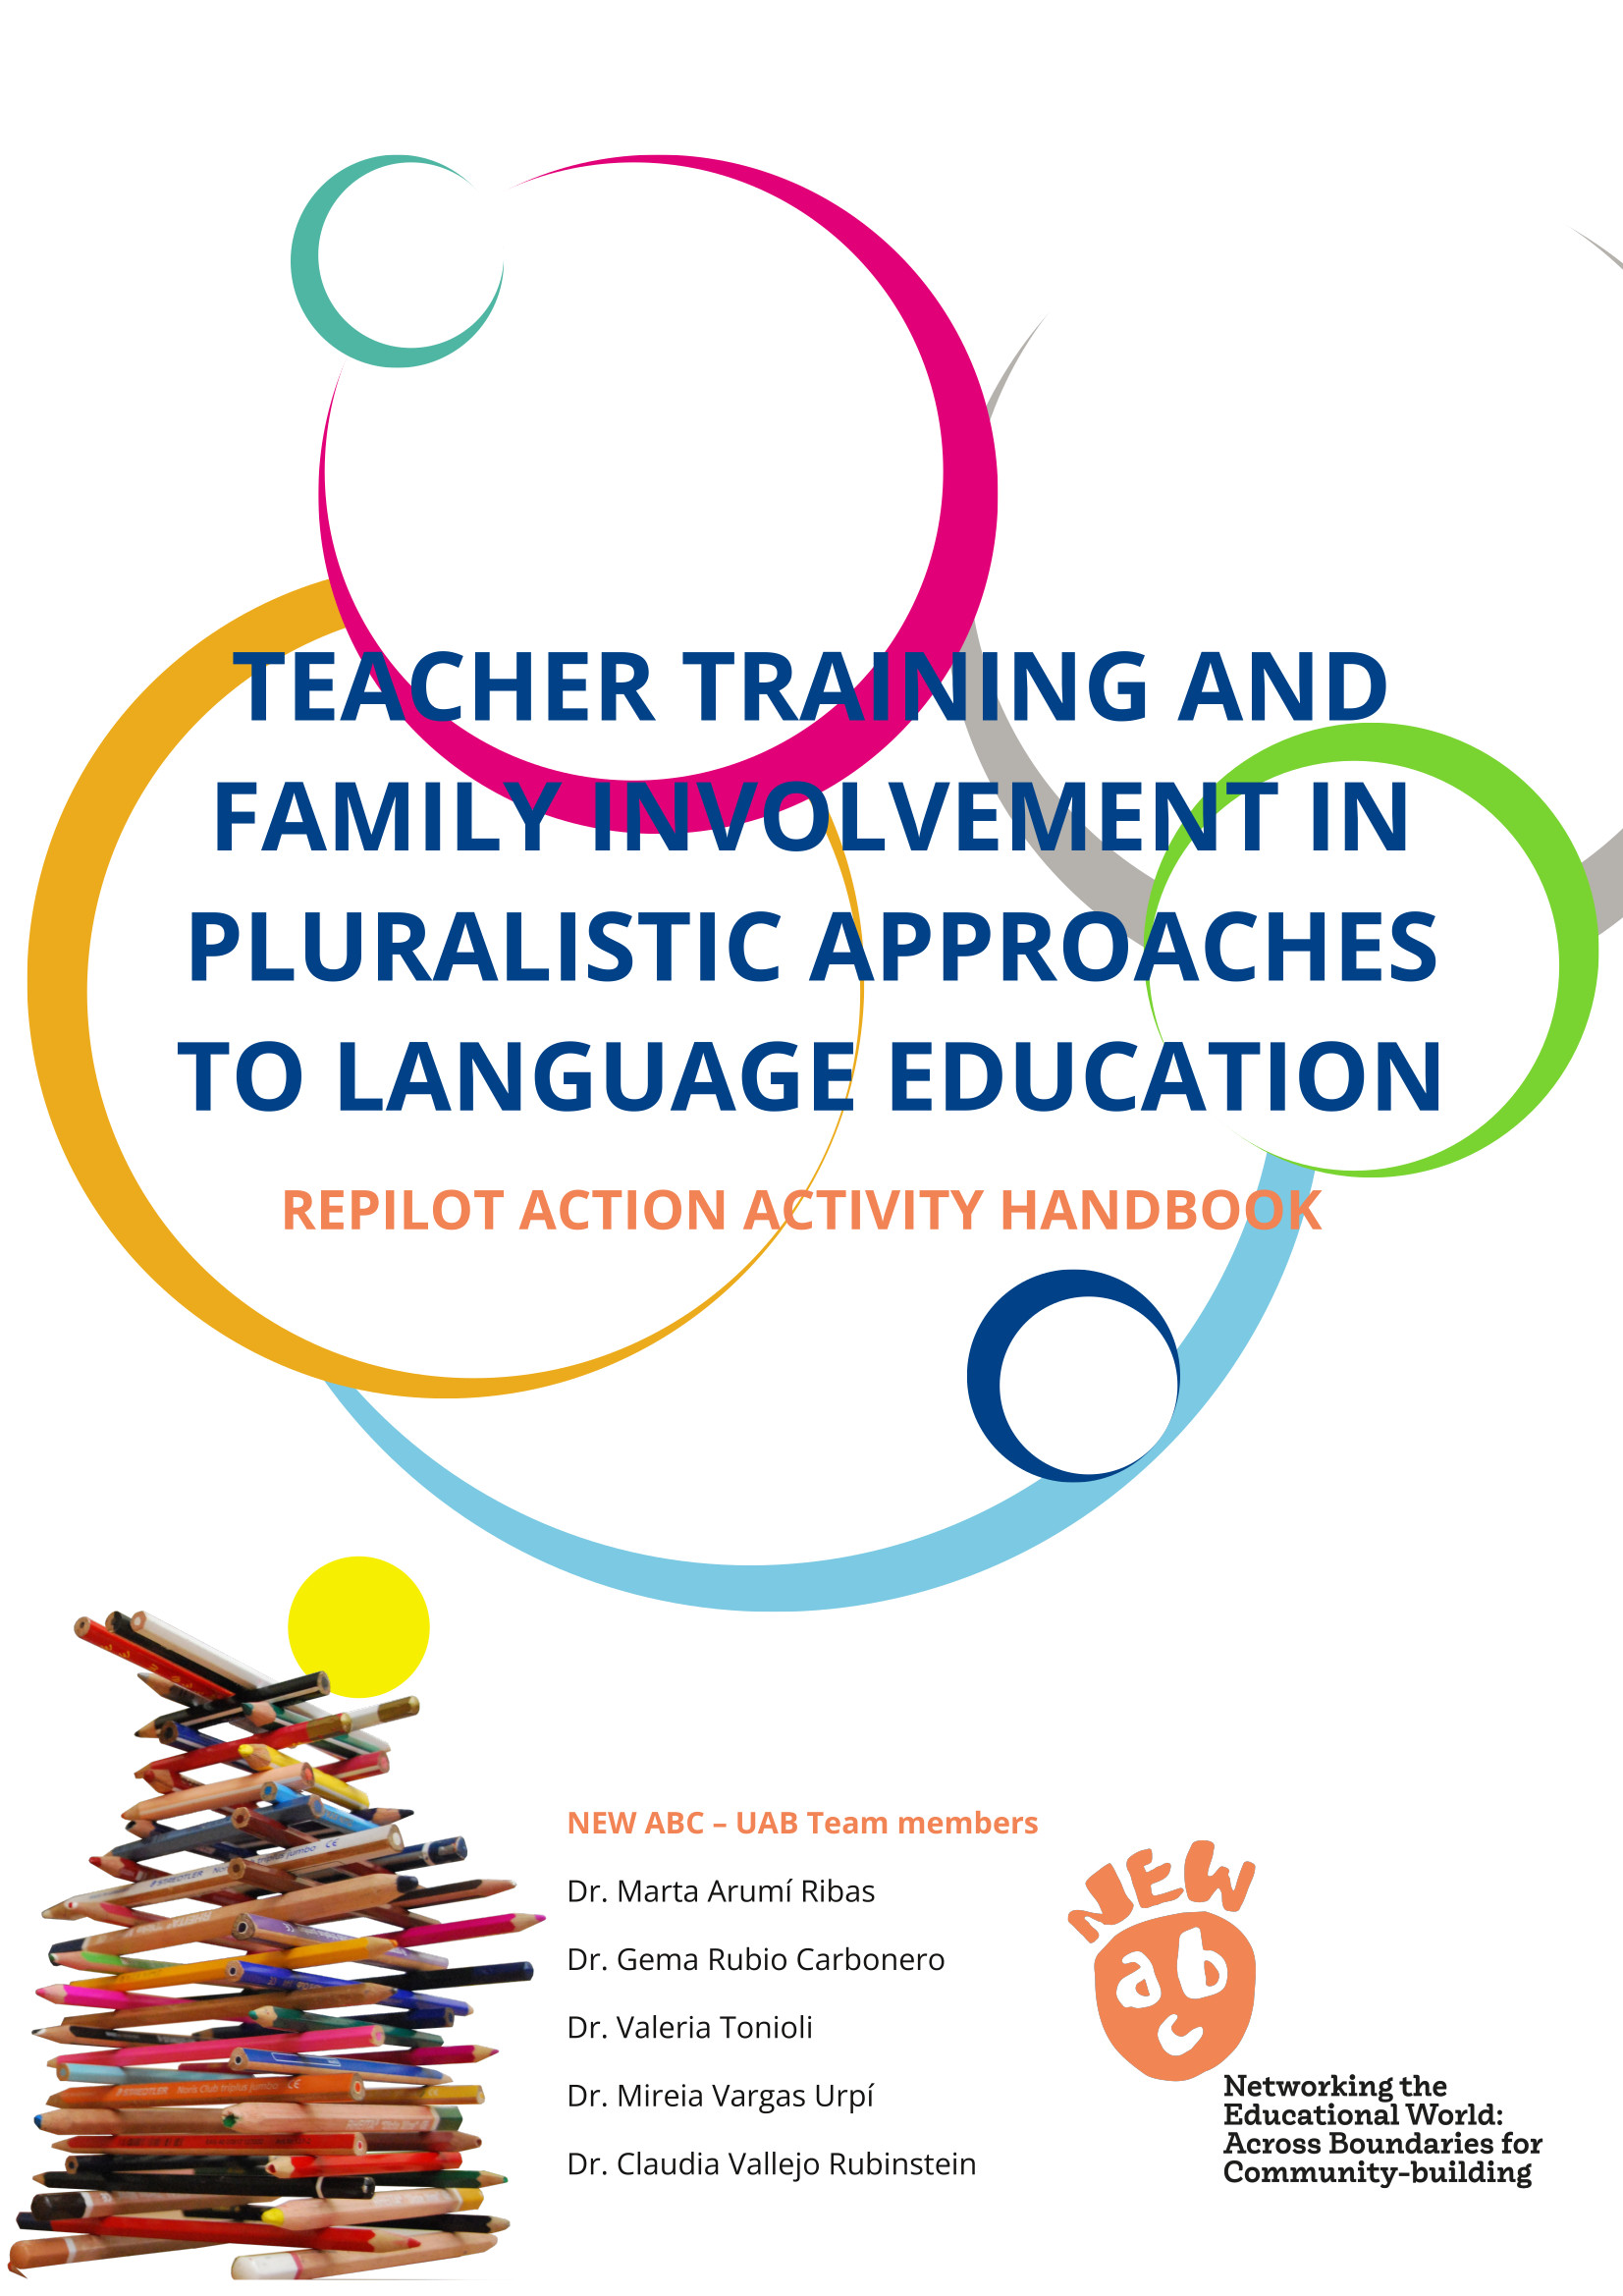 Teacher training and family involvement in pluralistic approaches to language education